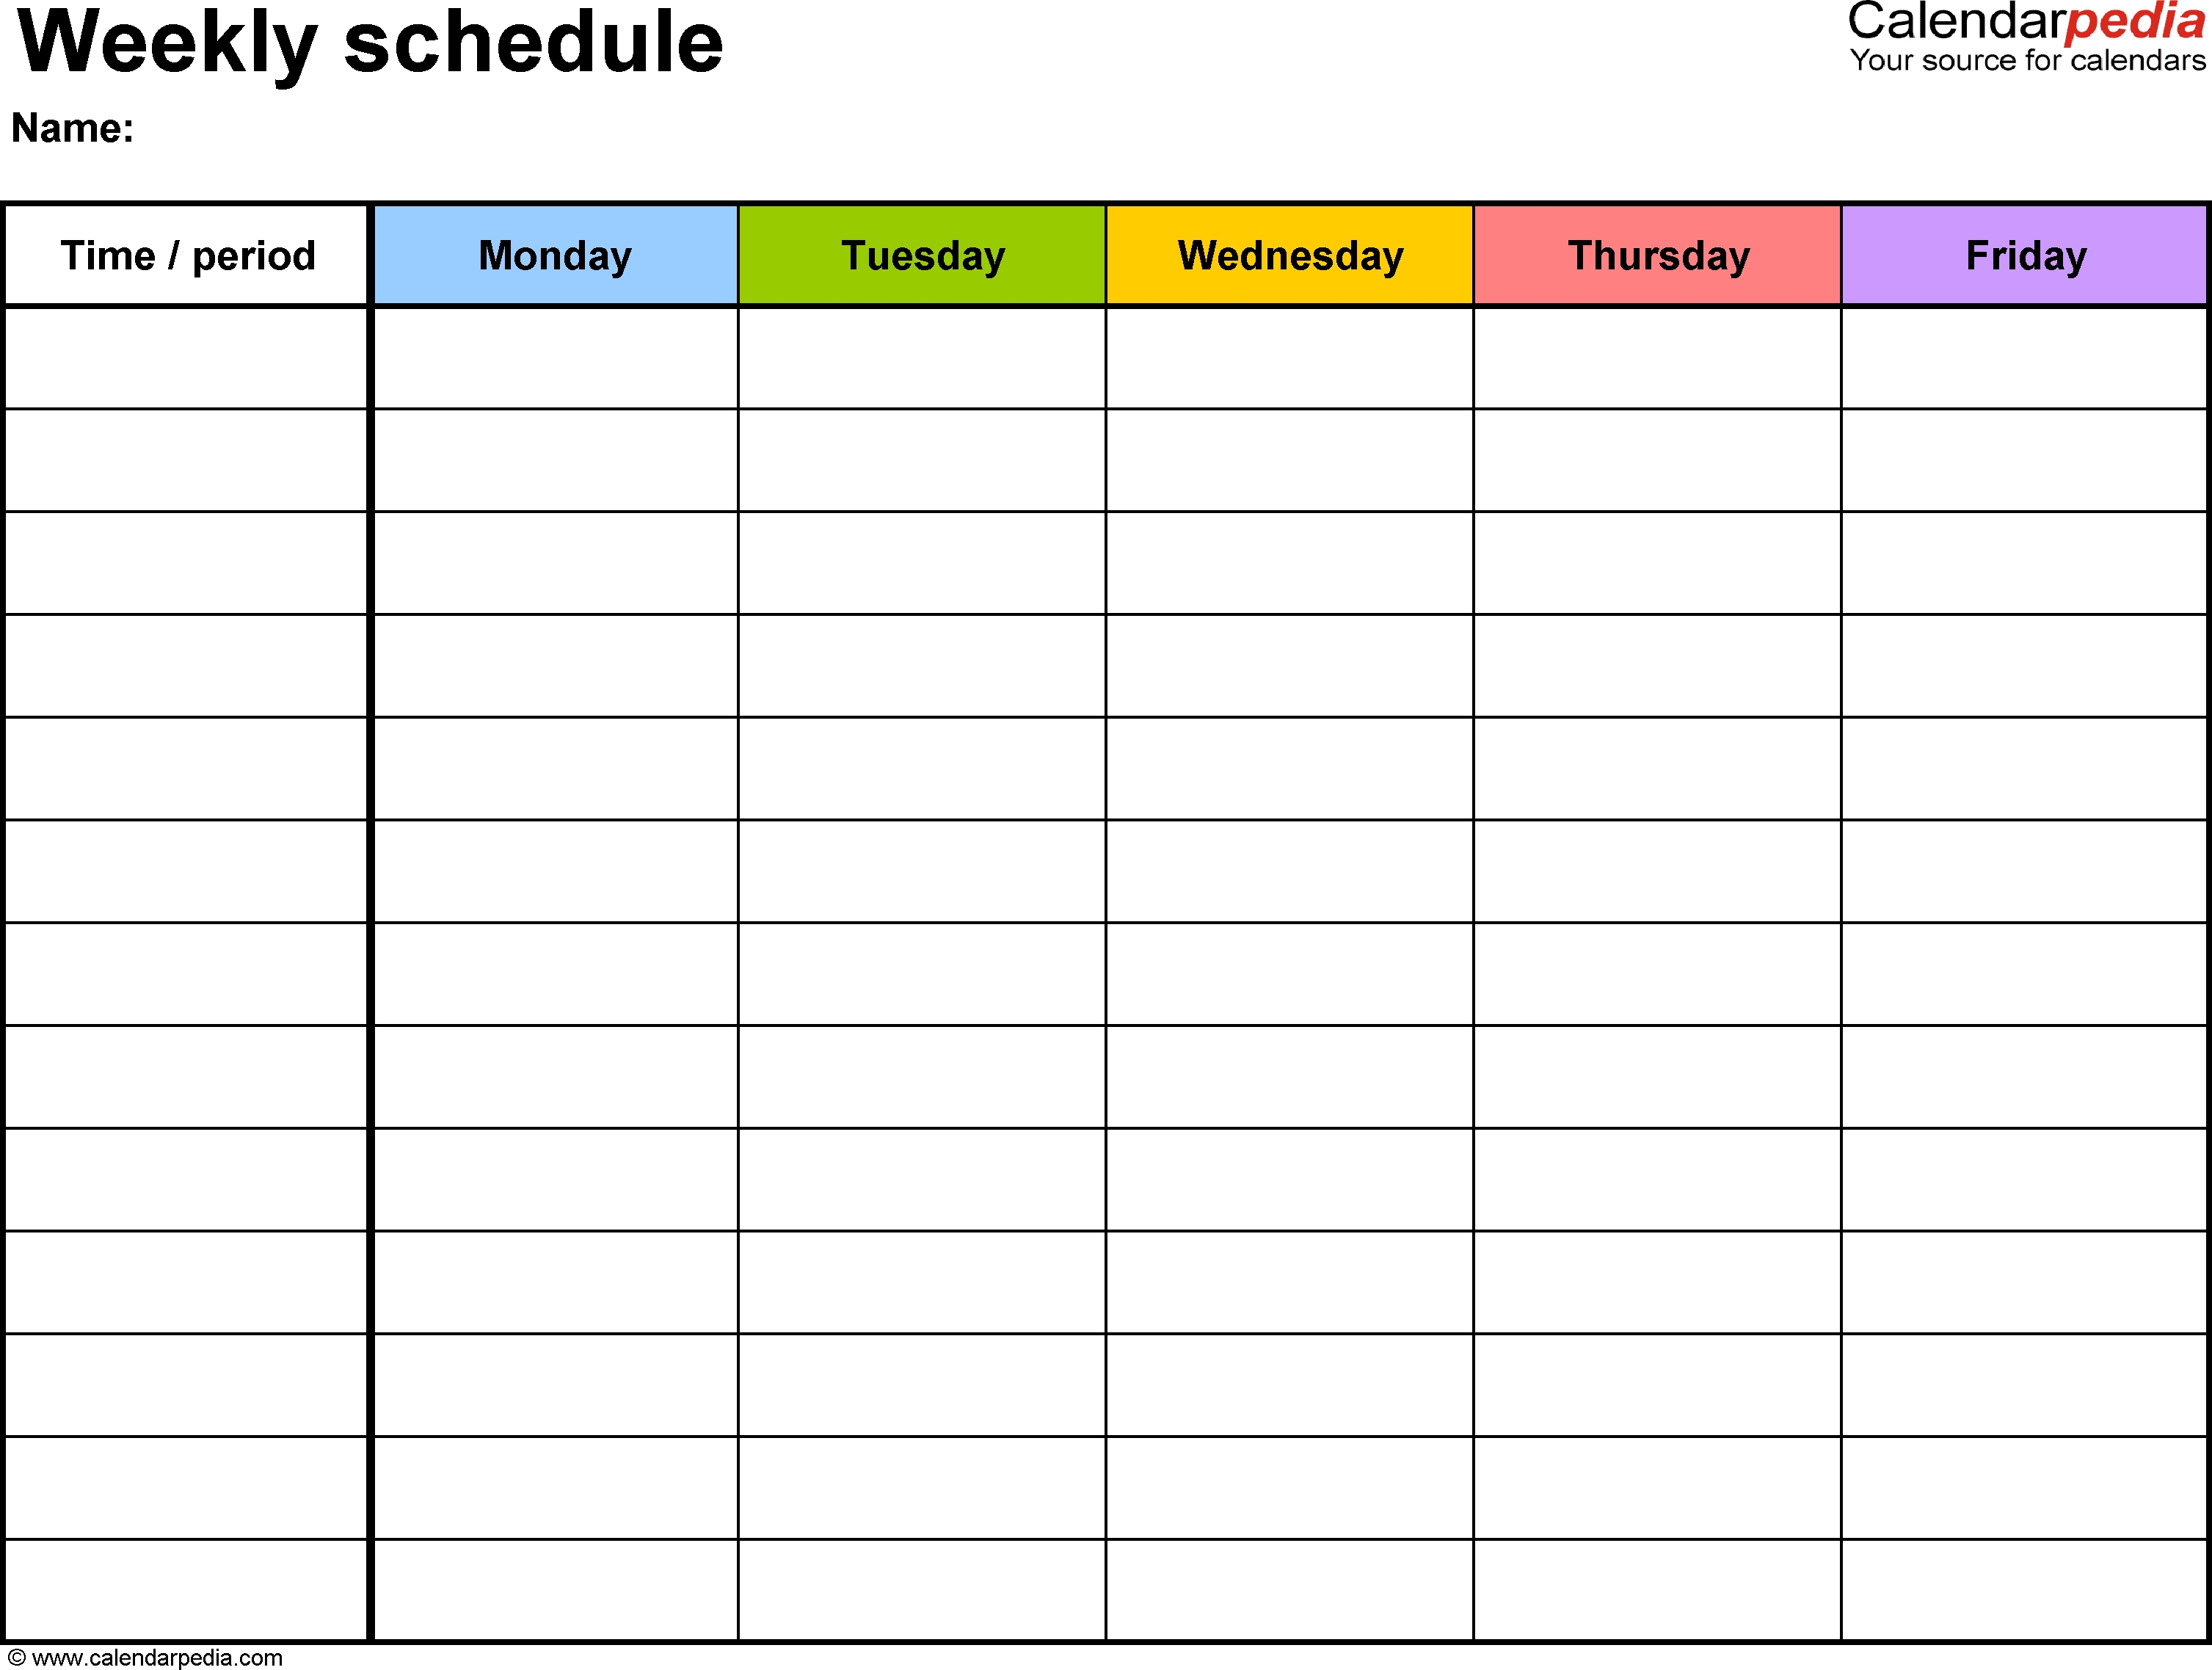 Free Weekly Schedule Templates For Pdf - 18 Templates Exceptional Free Blank Calendar Printable Weekly No Download